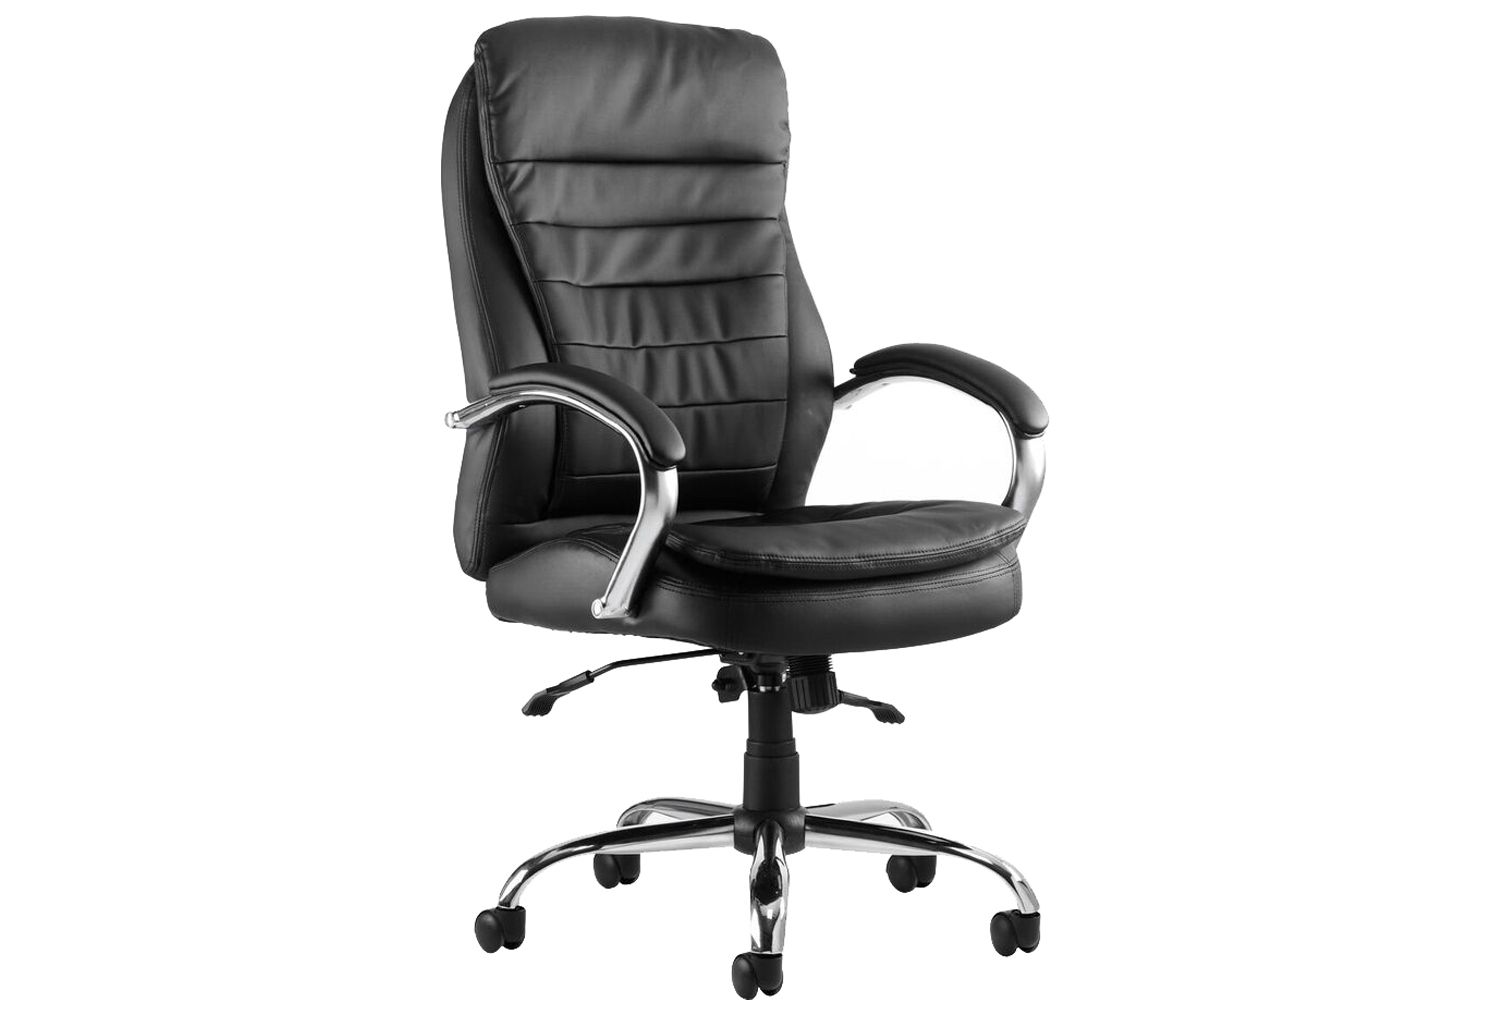 Babel High Back Leather Executive Office Chair Black, Black